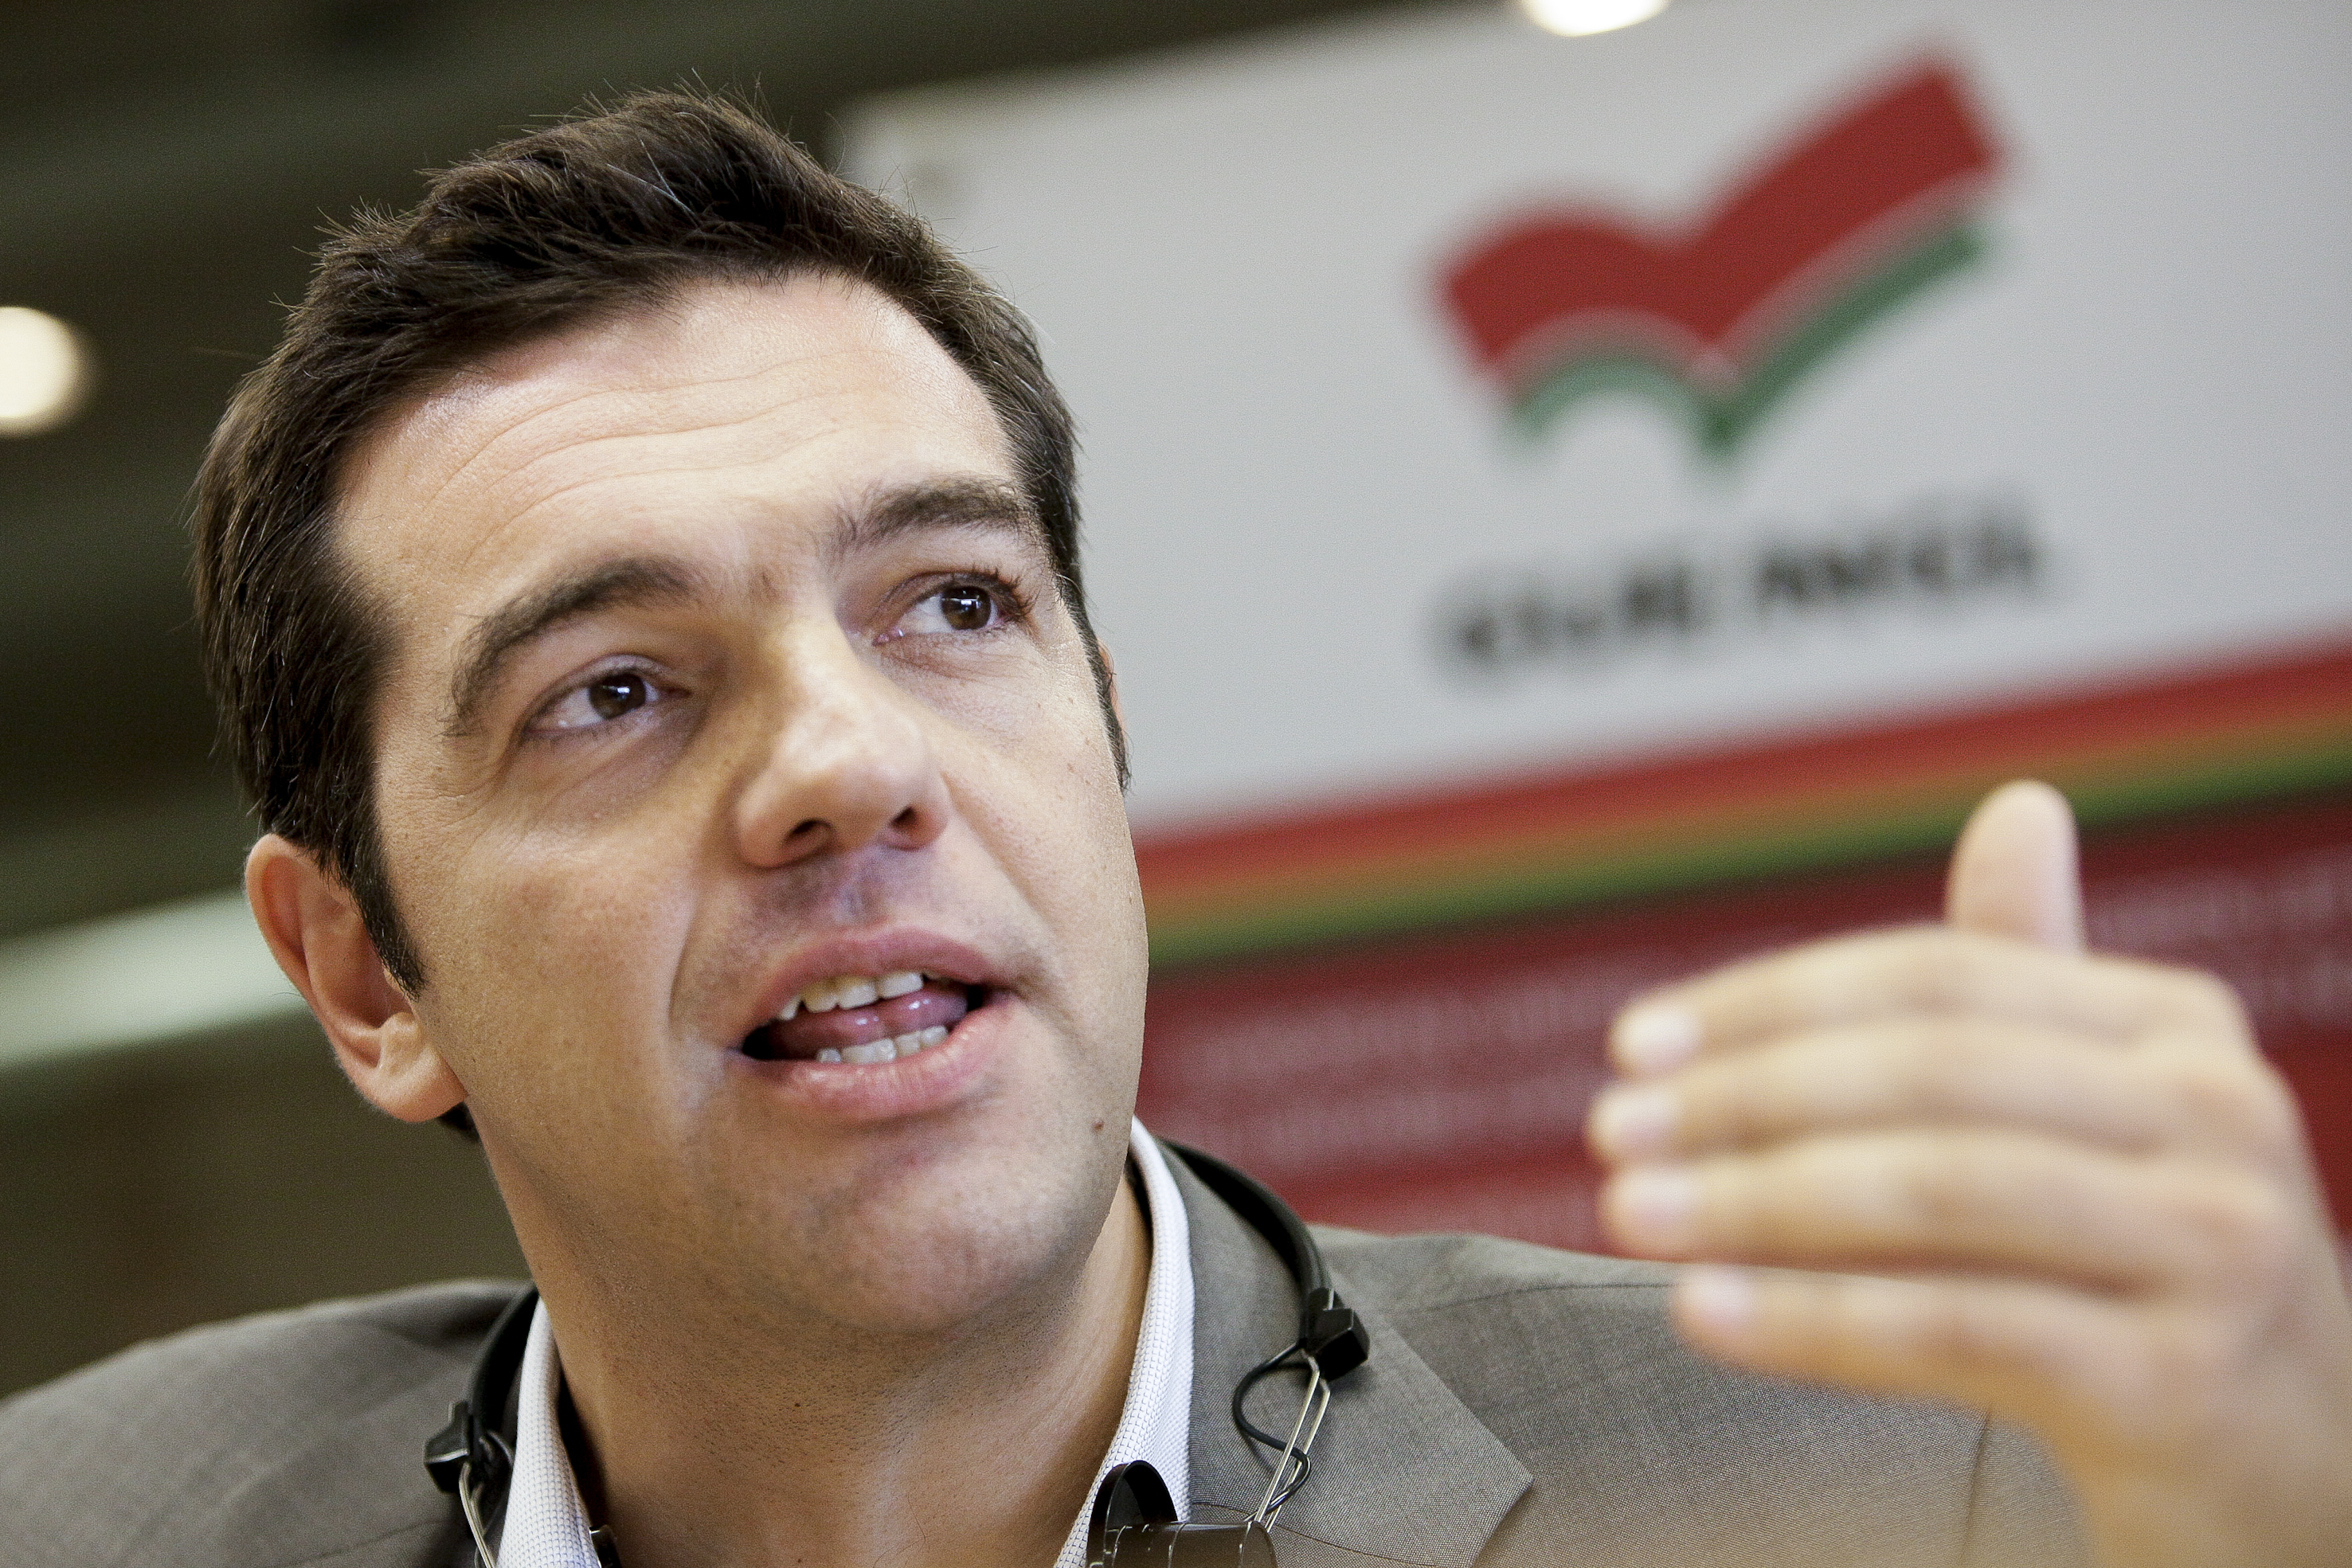 Alexis Tsipras, the leader of Syriza, has encouraged Greeks to vote against the austerity conditions